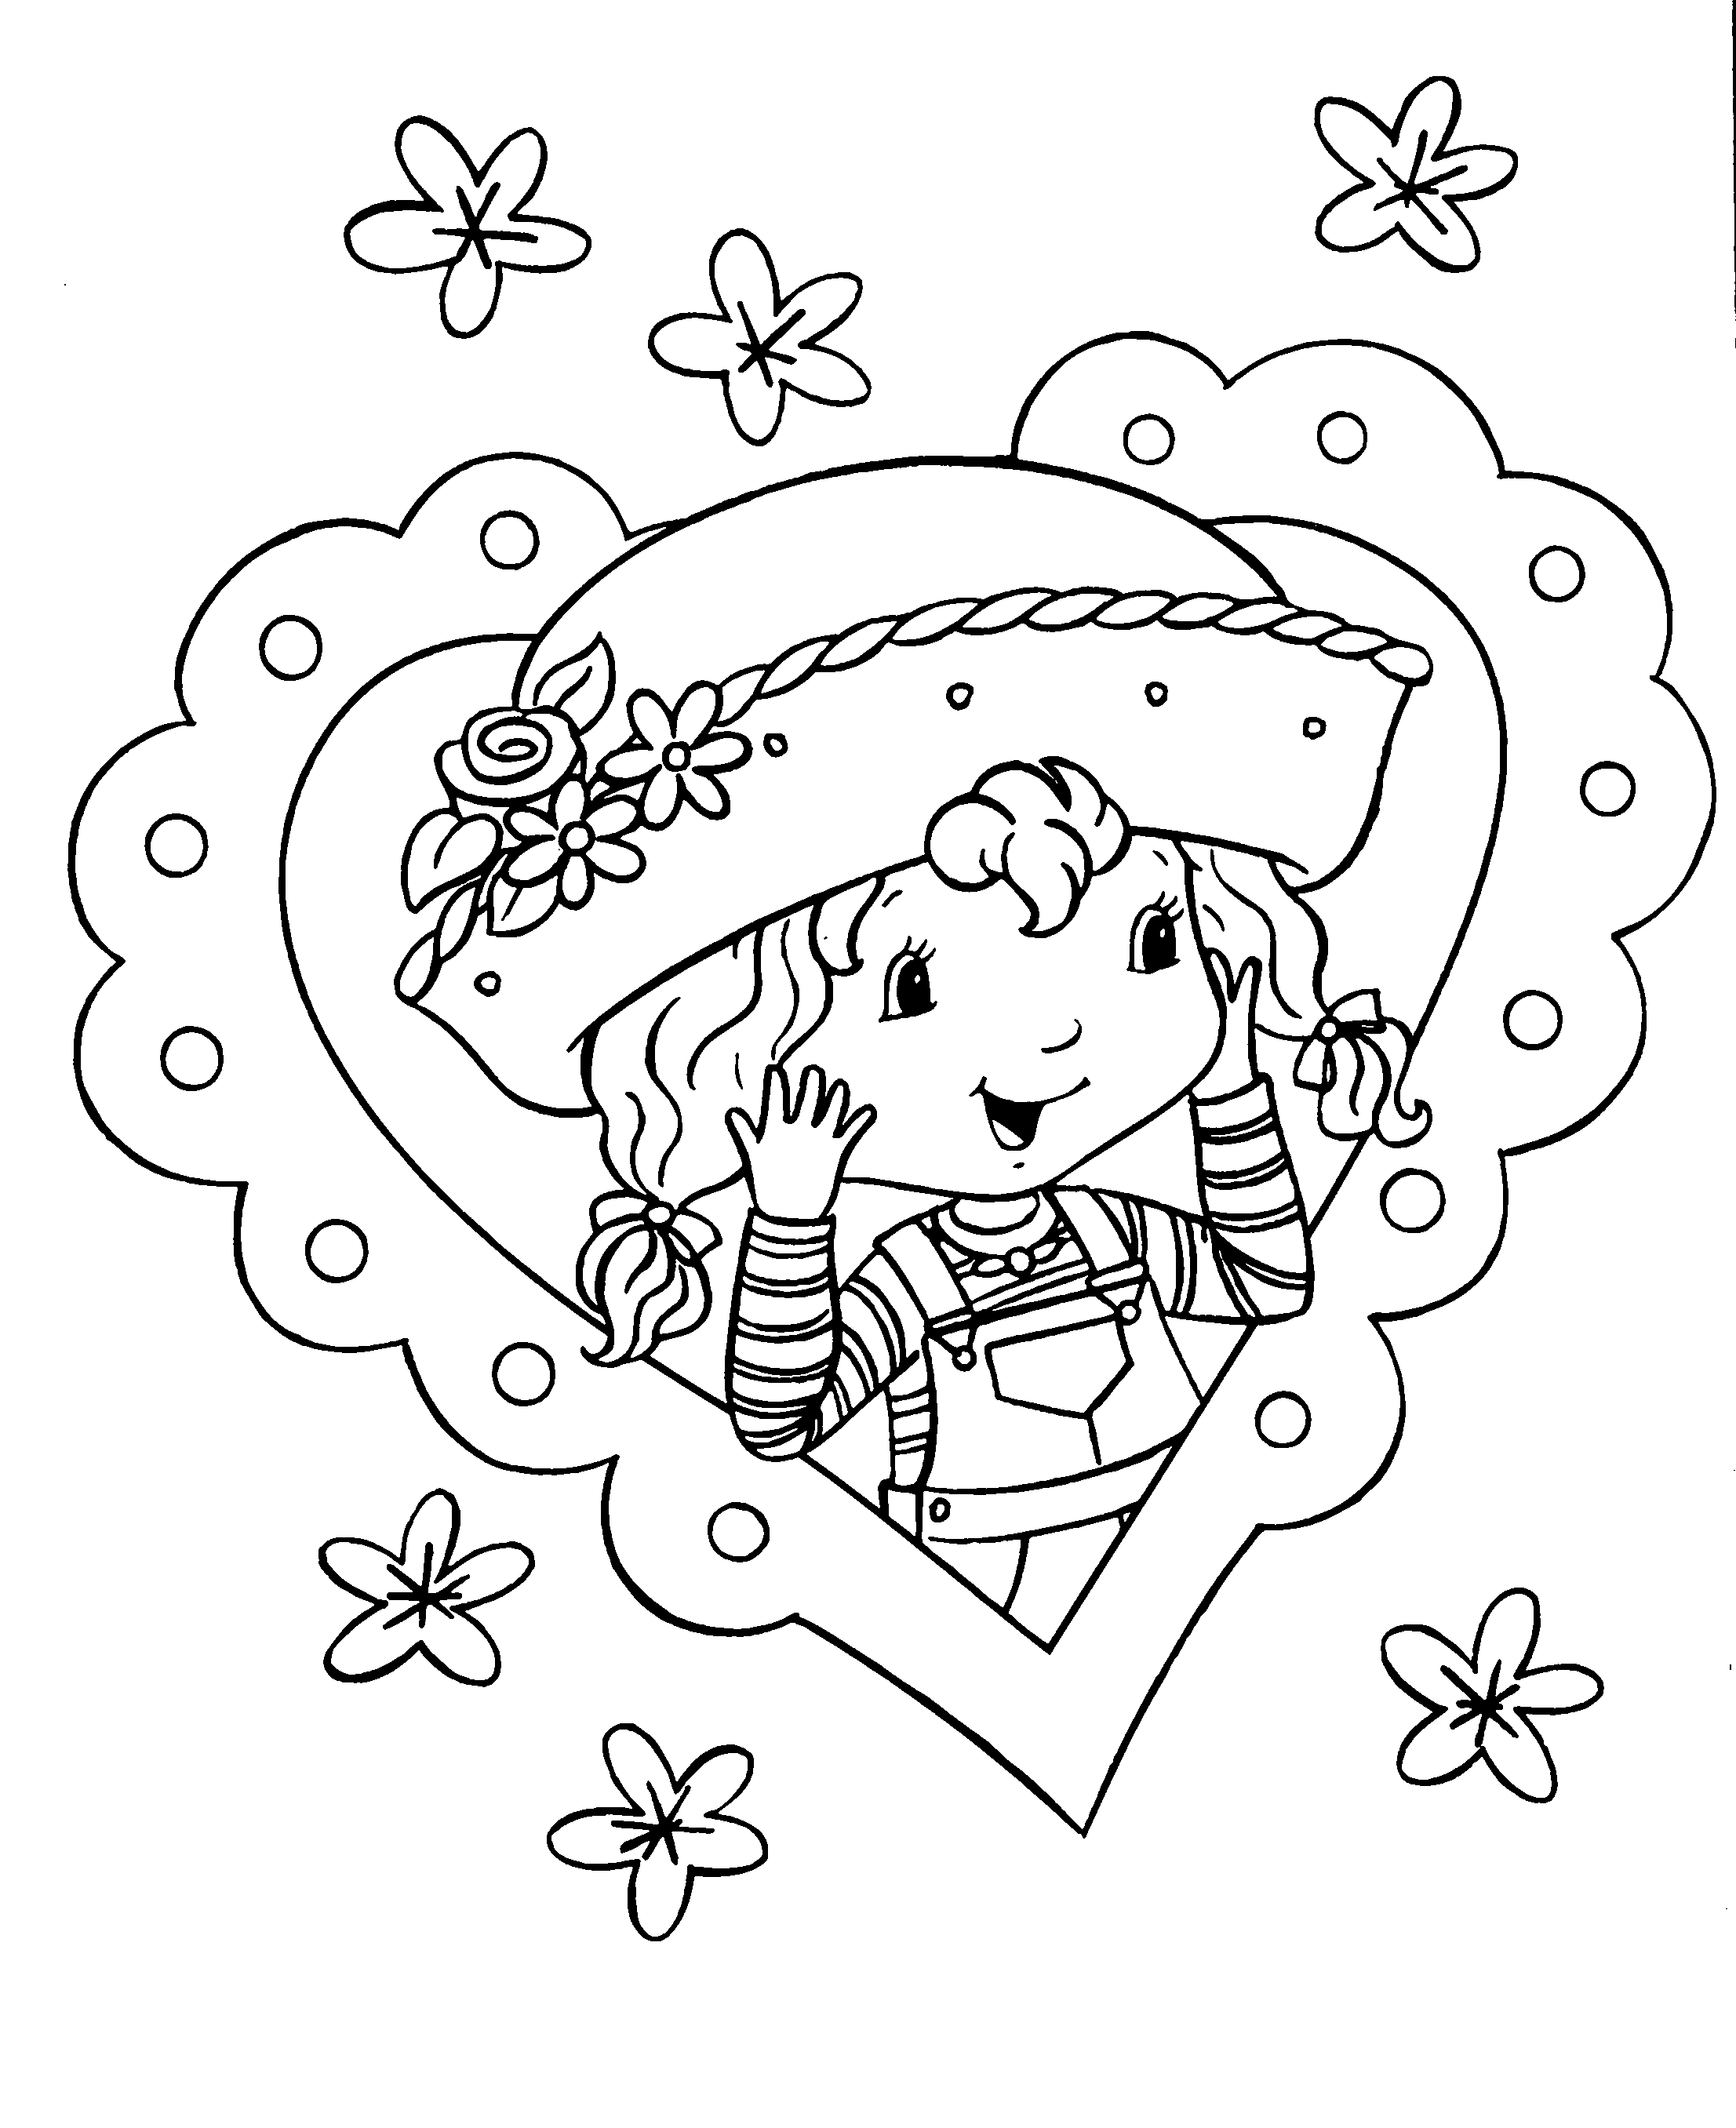 new strawberry shortcake coloring pages printable free printable strawberry shortcake coloring pages for kids pages shortcake coloring new strawberry printable 